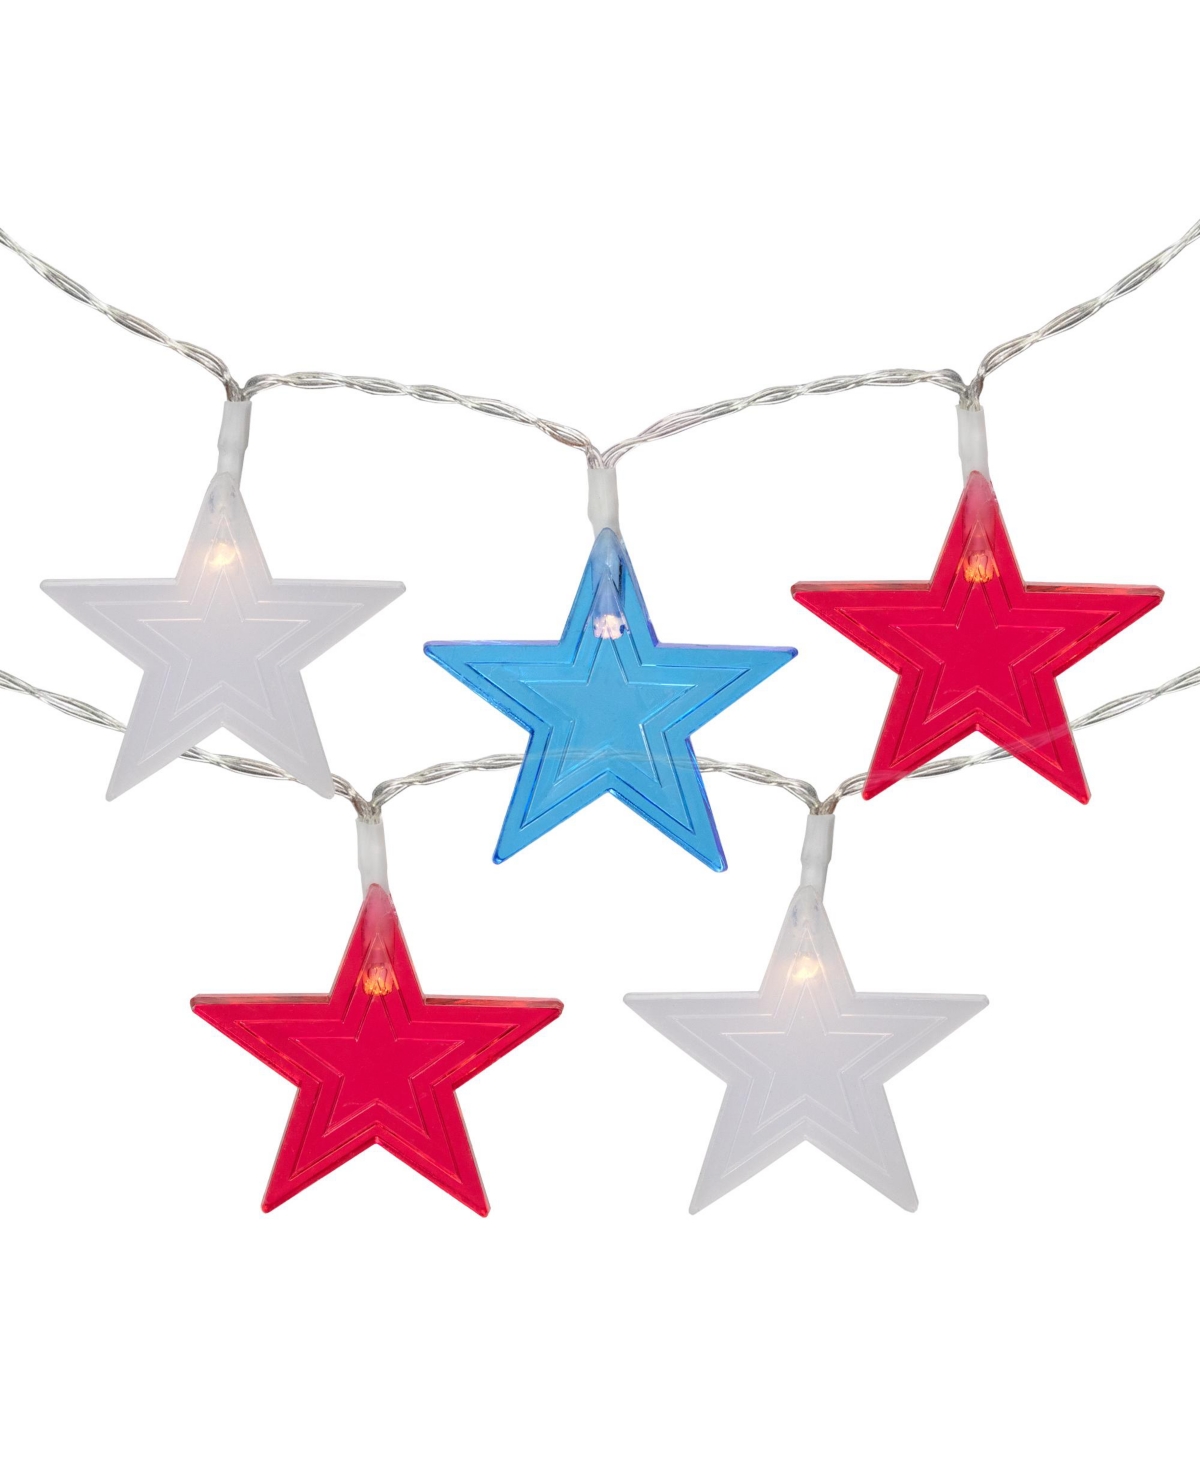 Northlight 20-count Patriotic Americana Star Led String Lights 9.5' Clear Wire In Red